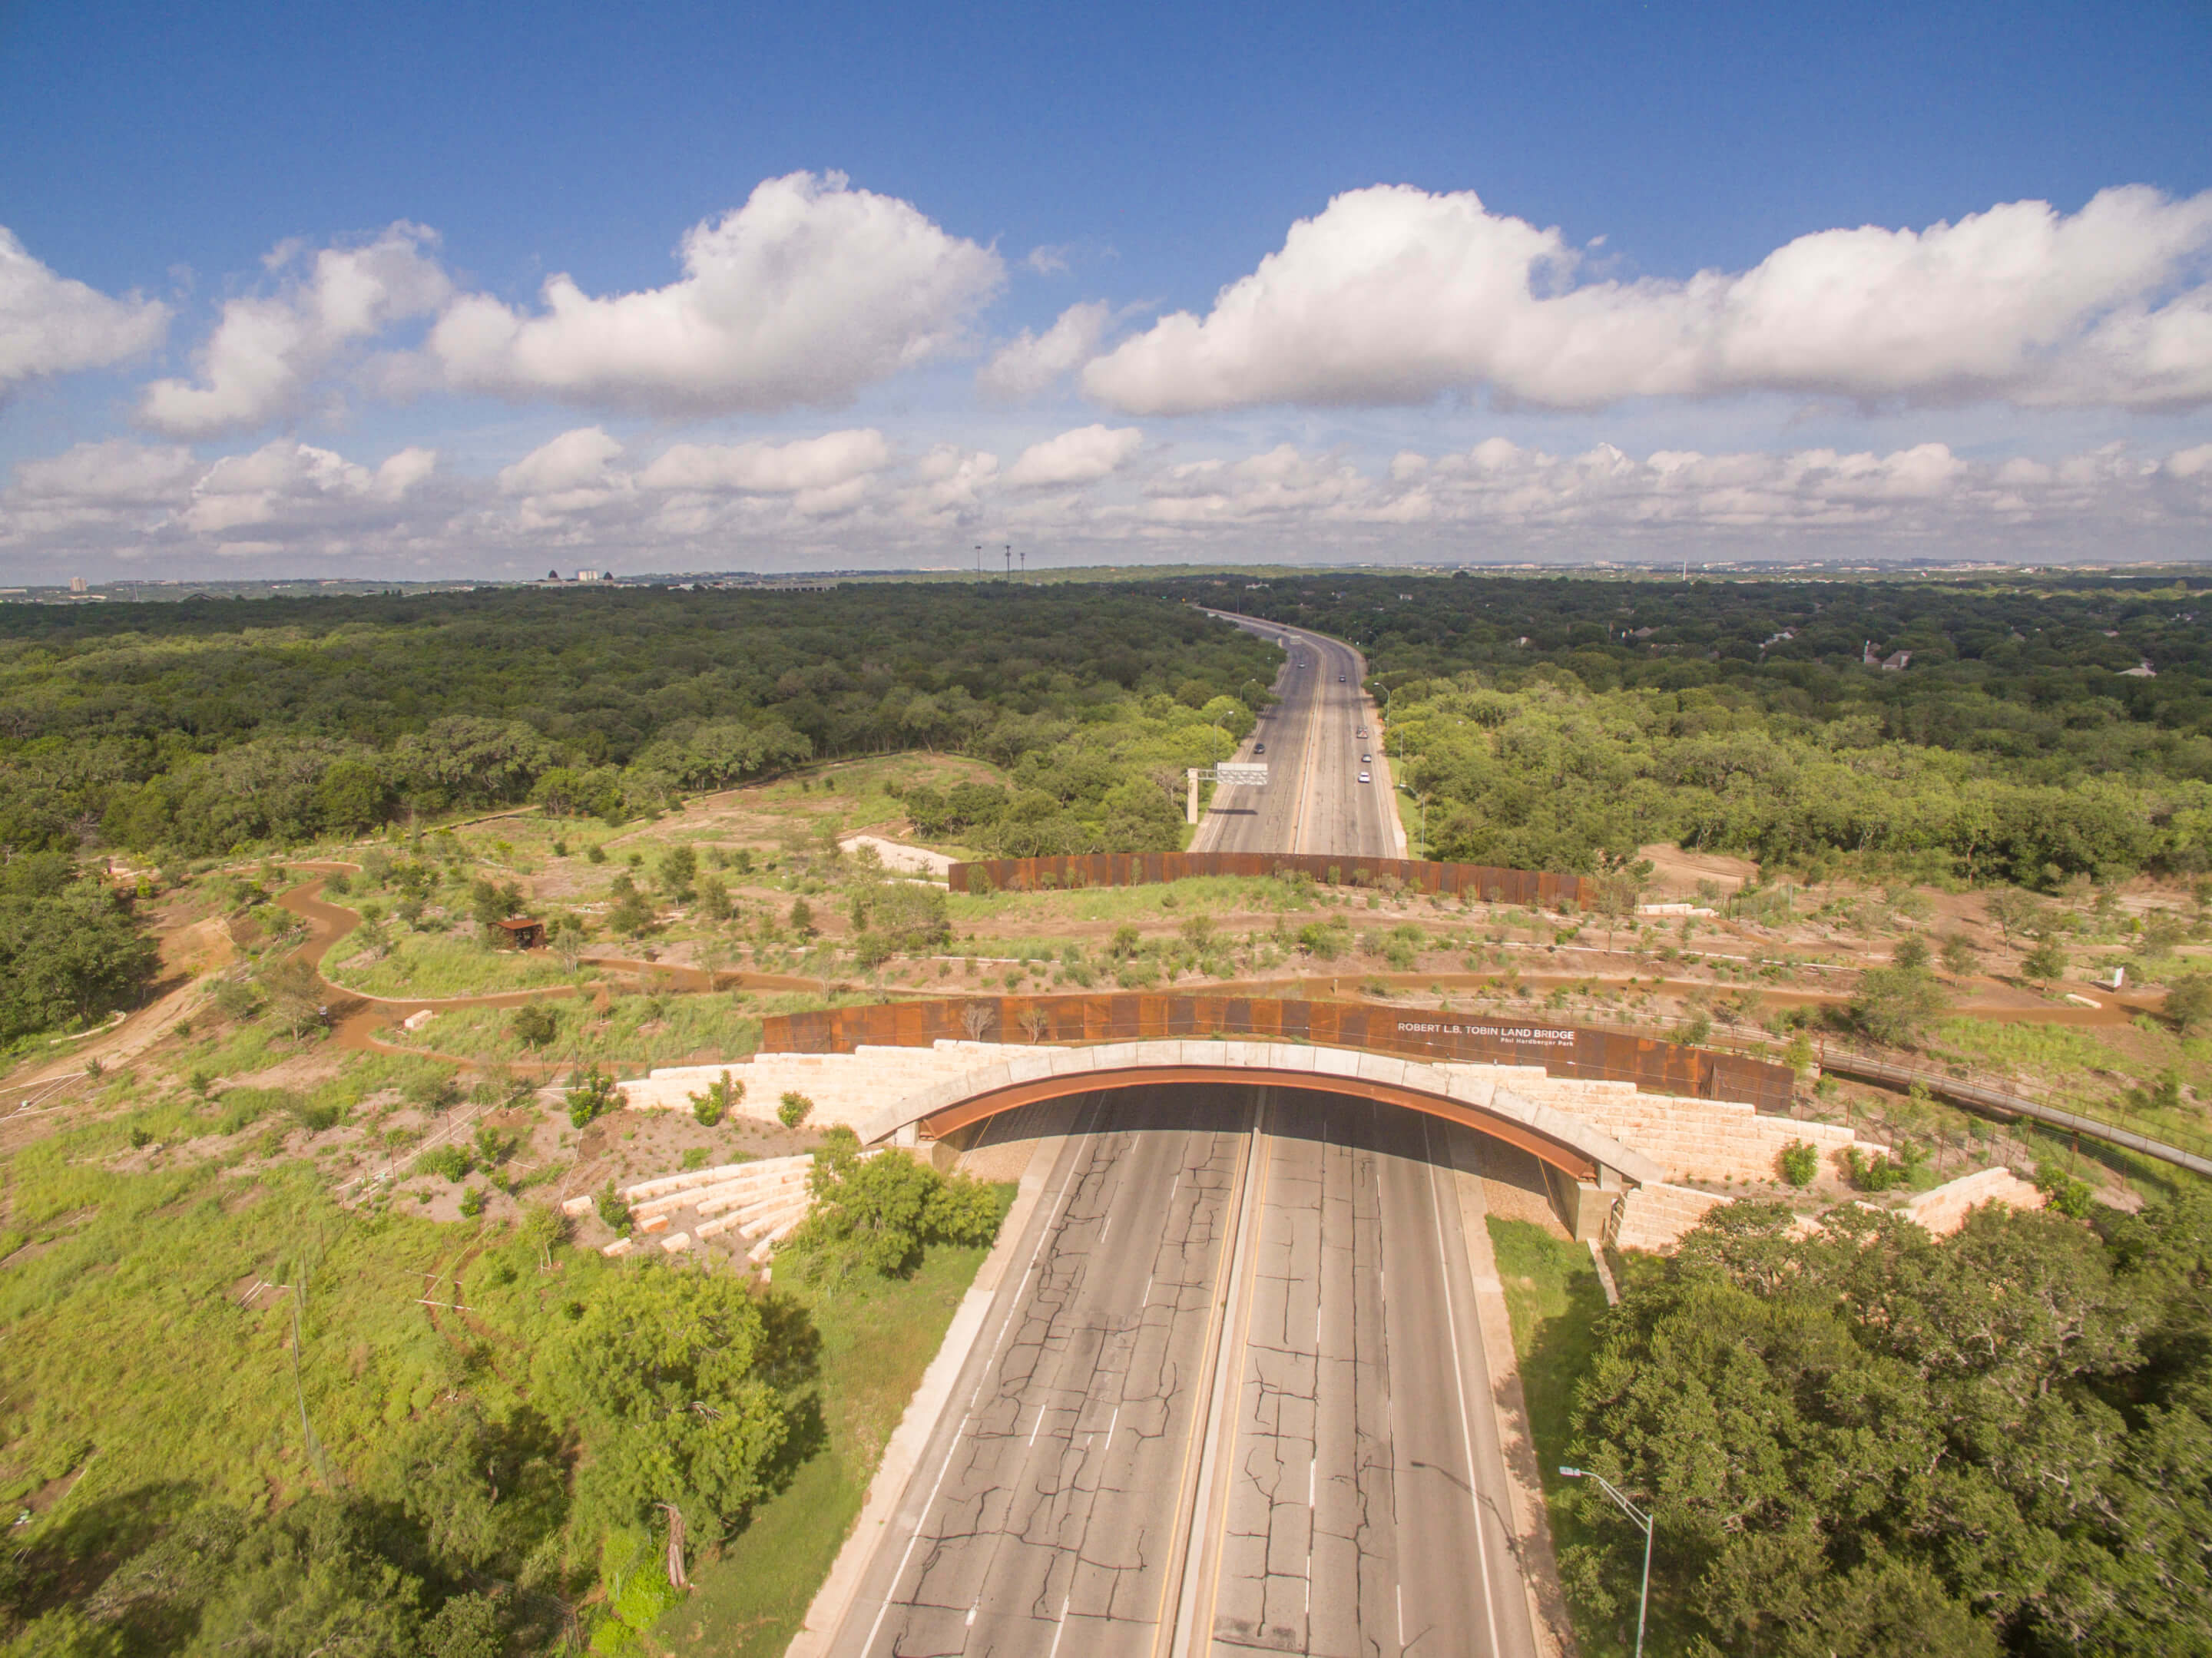 Aerial photograph of a land bridge spanning a highway in san antonio